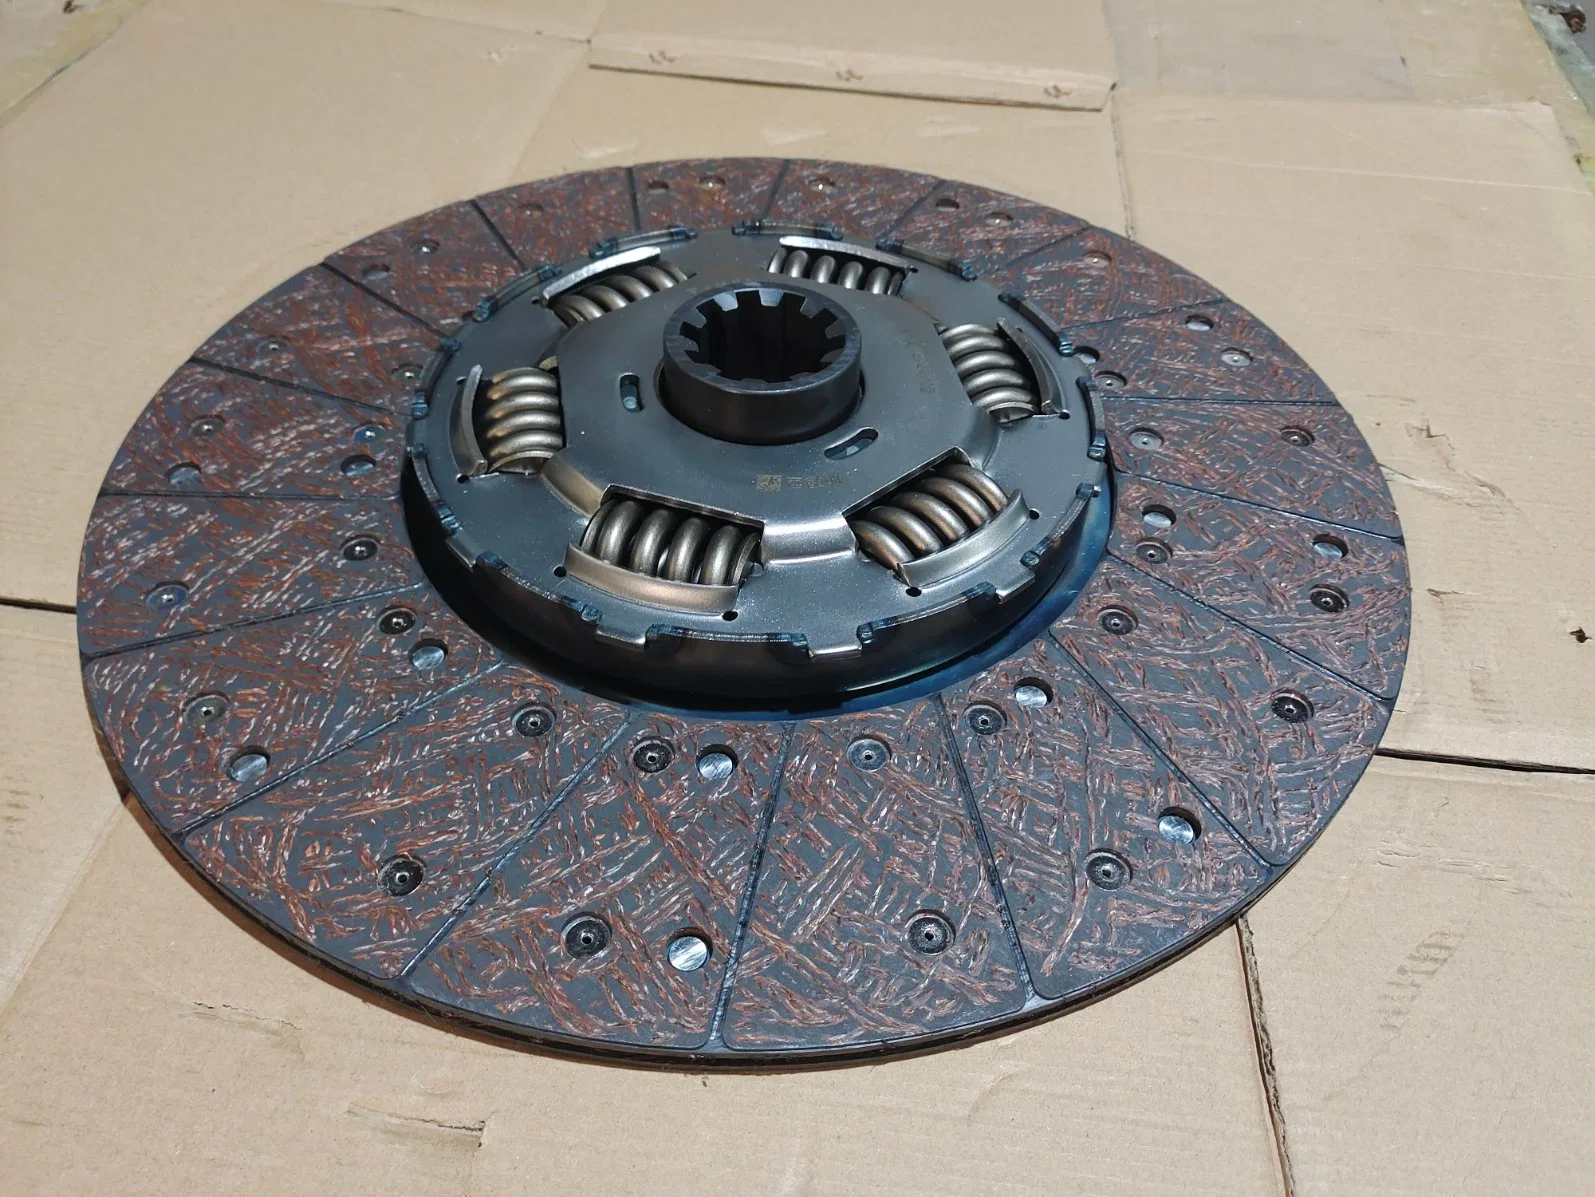 The Clutch Is Applicable to Cnhtc Howershakman FAW Beiben Hongyan Tractor/Garbage Truck/Dump Truck/Tipper Truck/Tractor Auto Parts Truck